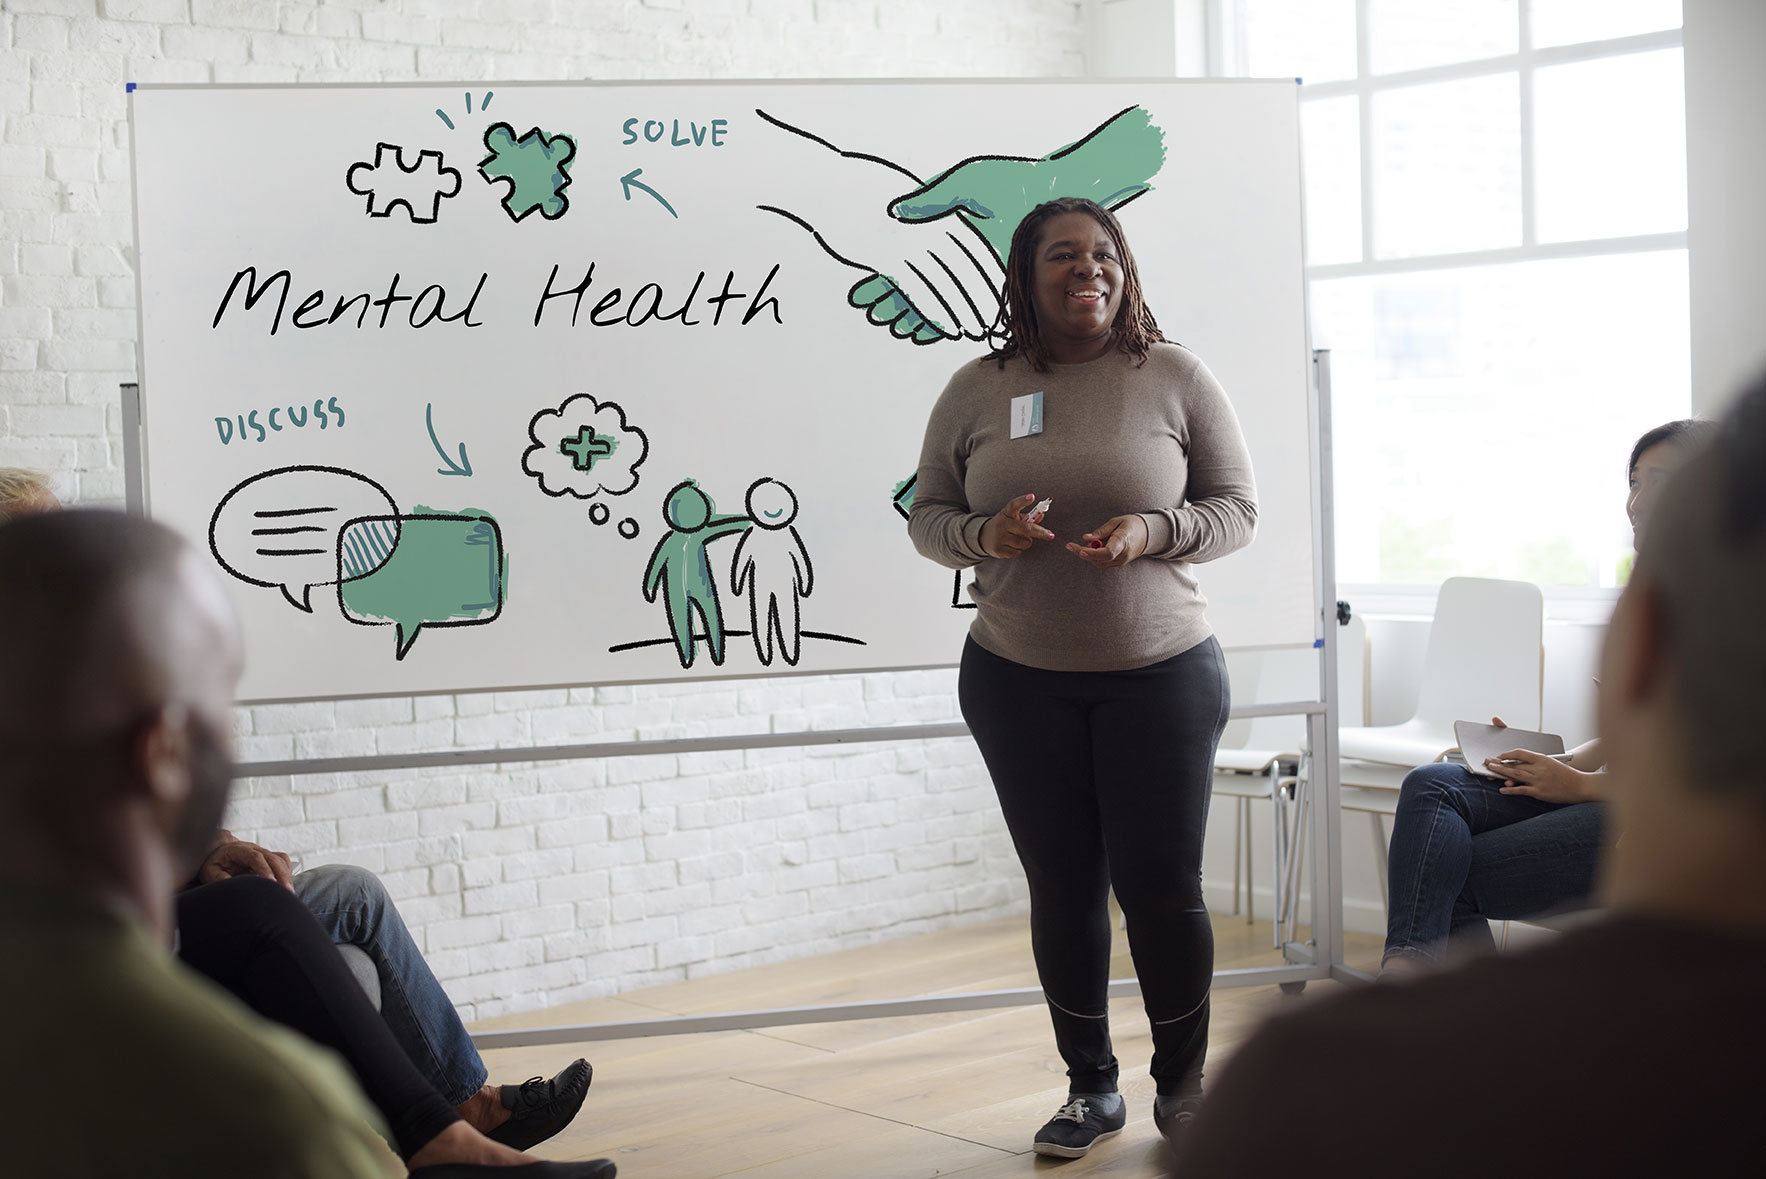 The essential role of mental health in a diverse, inclusive workplace